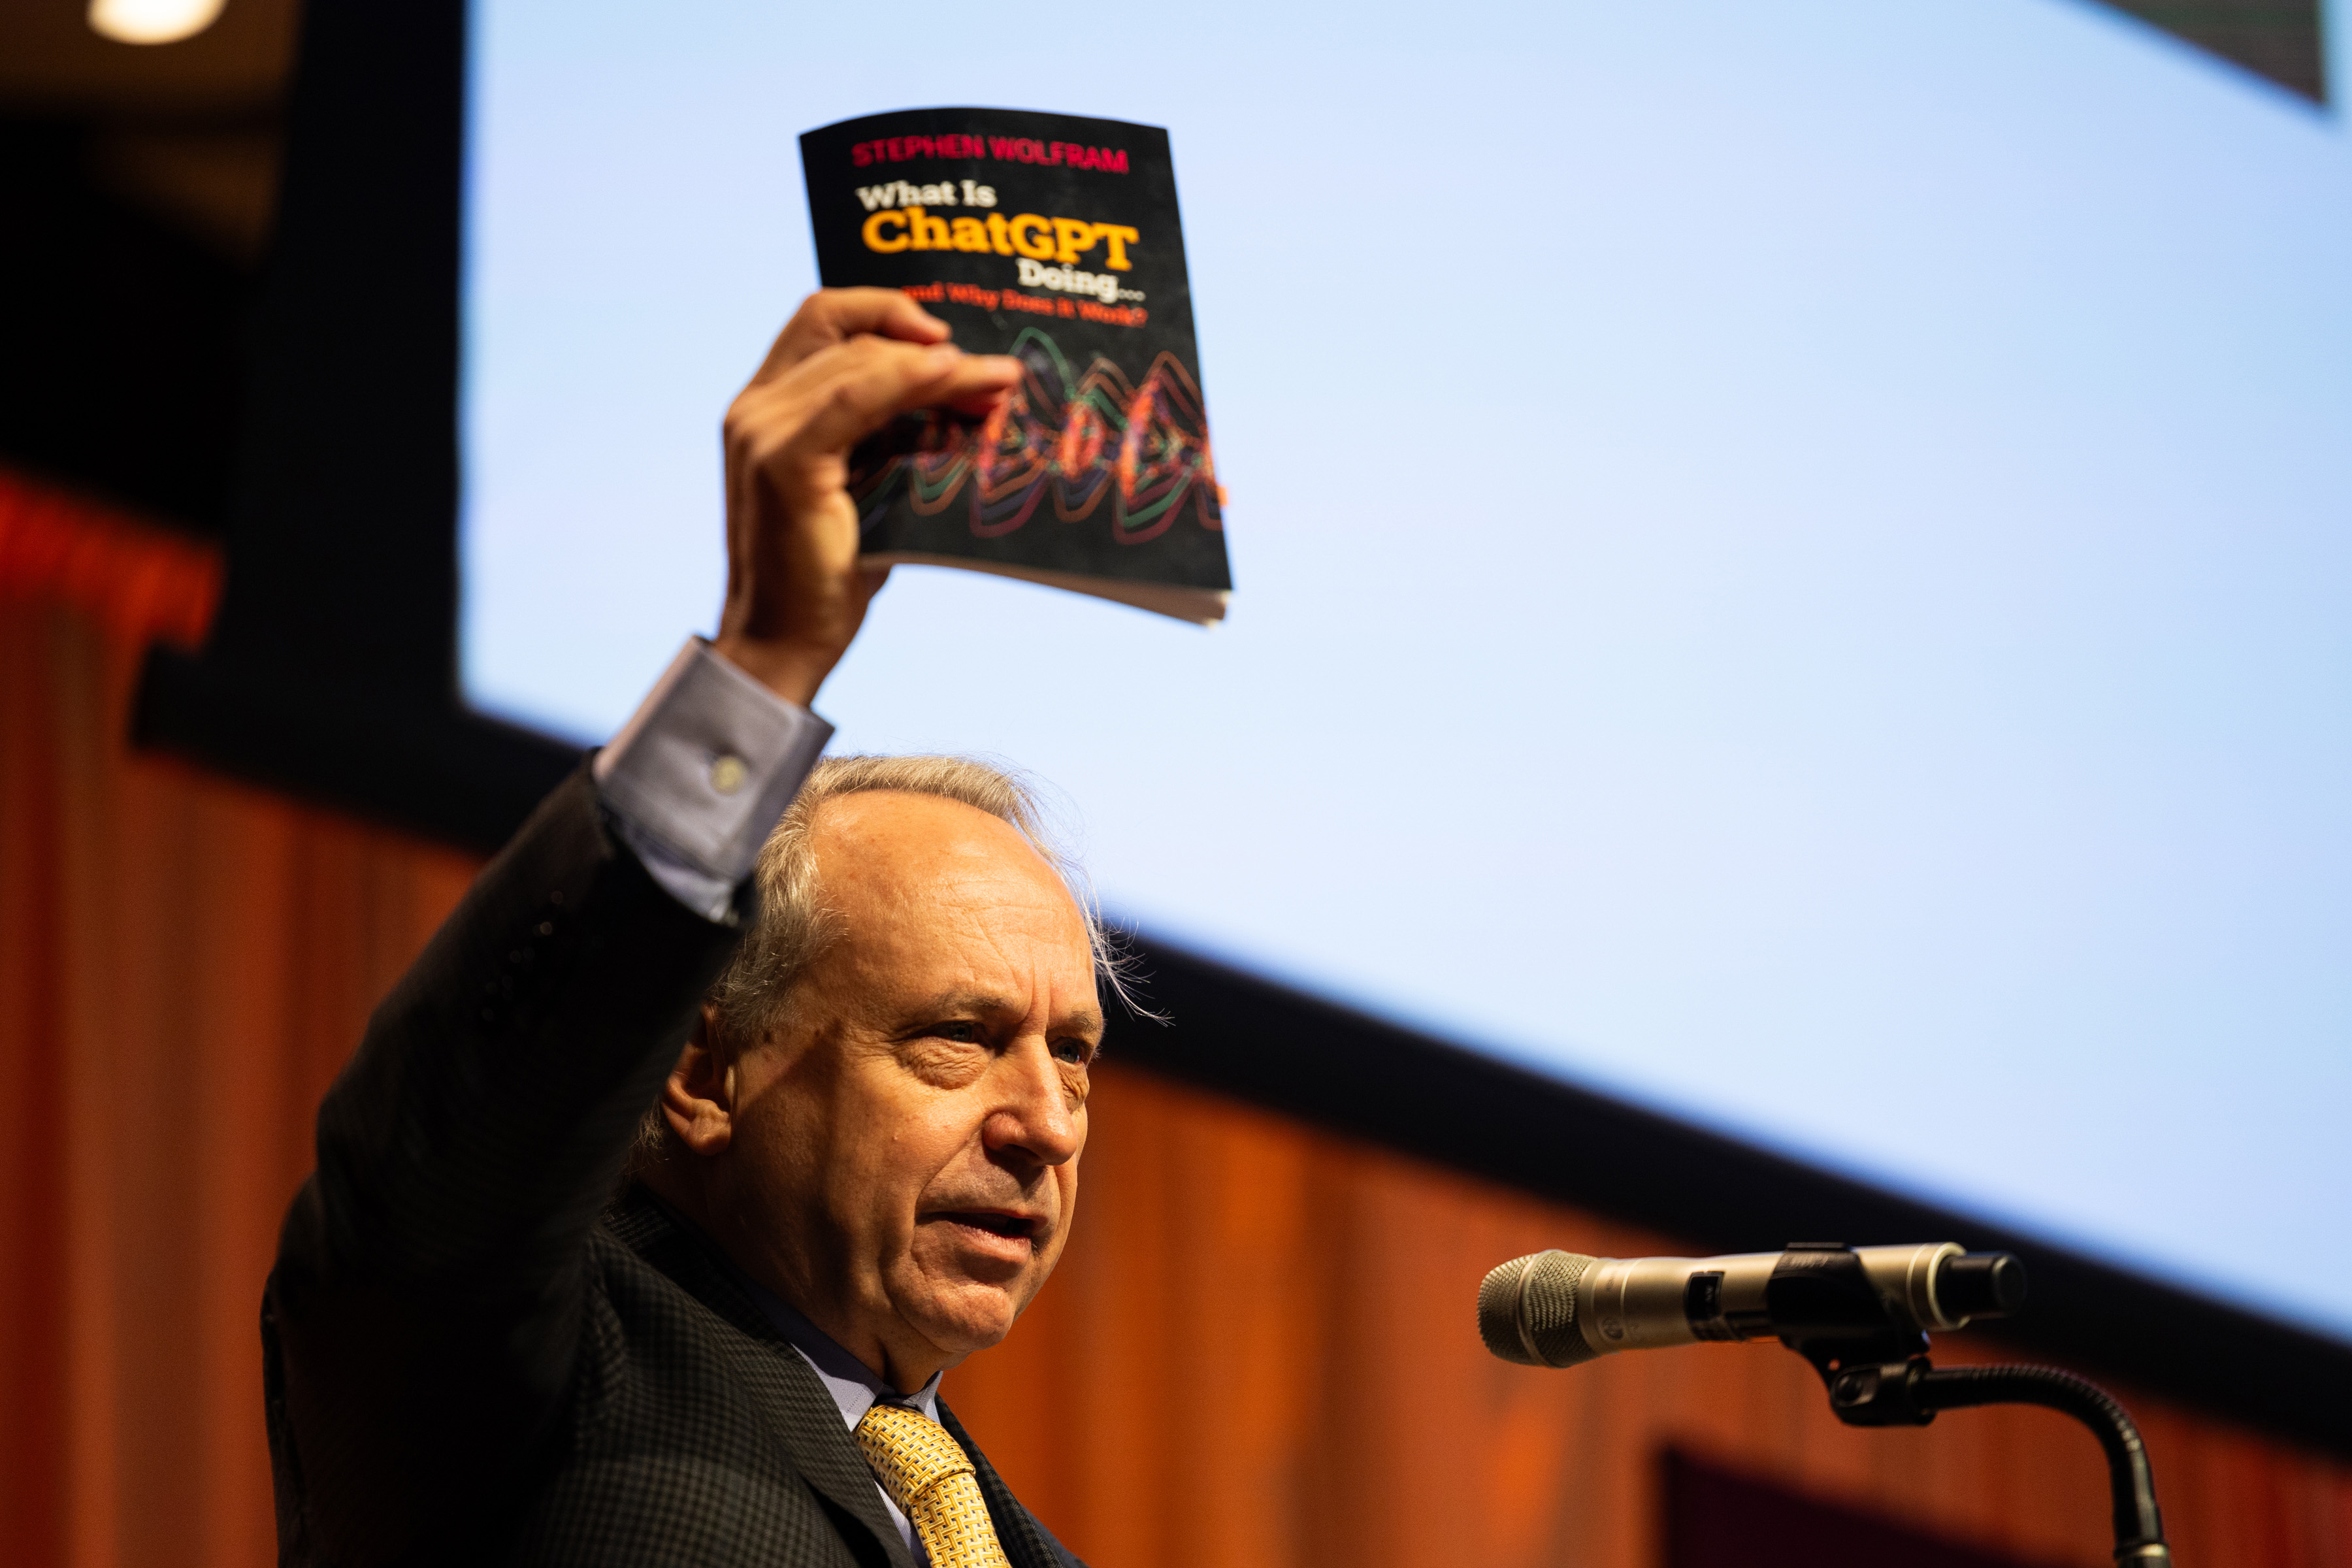 Rodney Brooks, iRobot co-founder and former director of CSAIL, holds up a copy of Stephen Wolfram's book, 